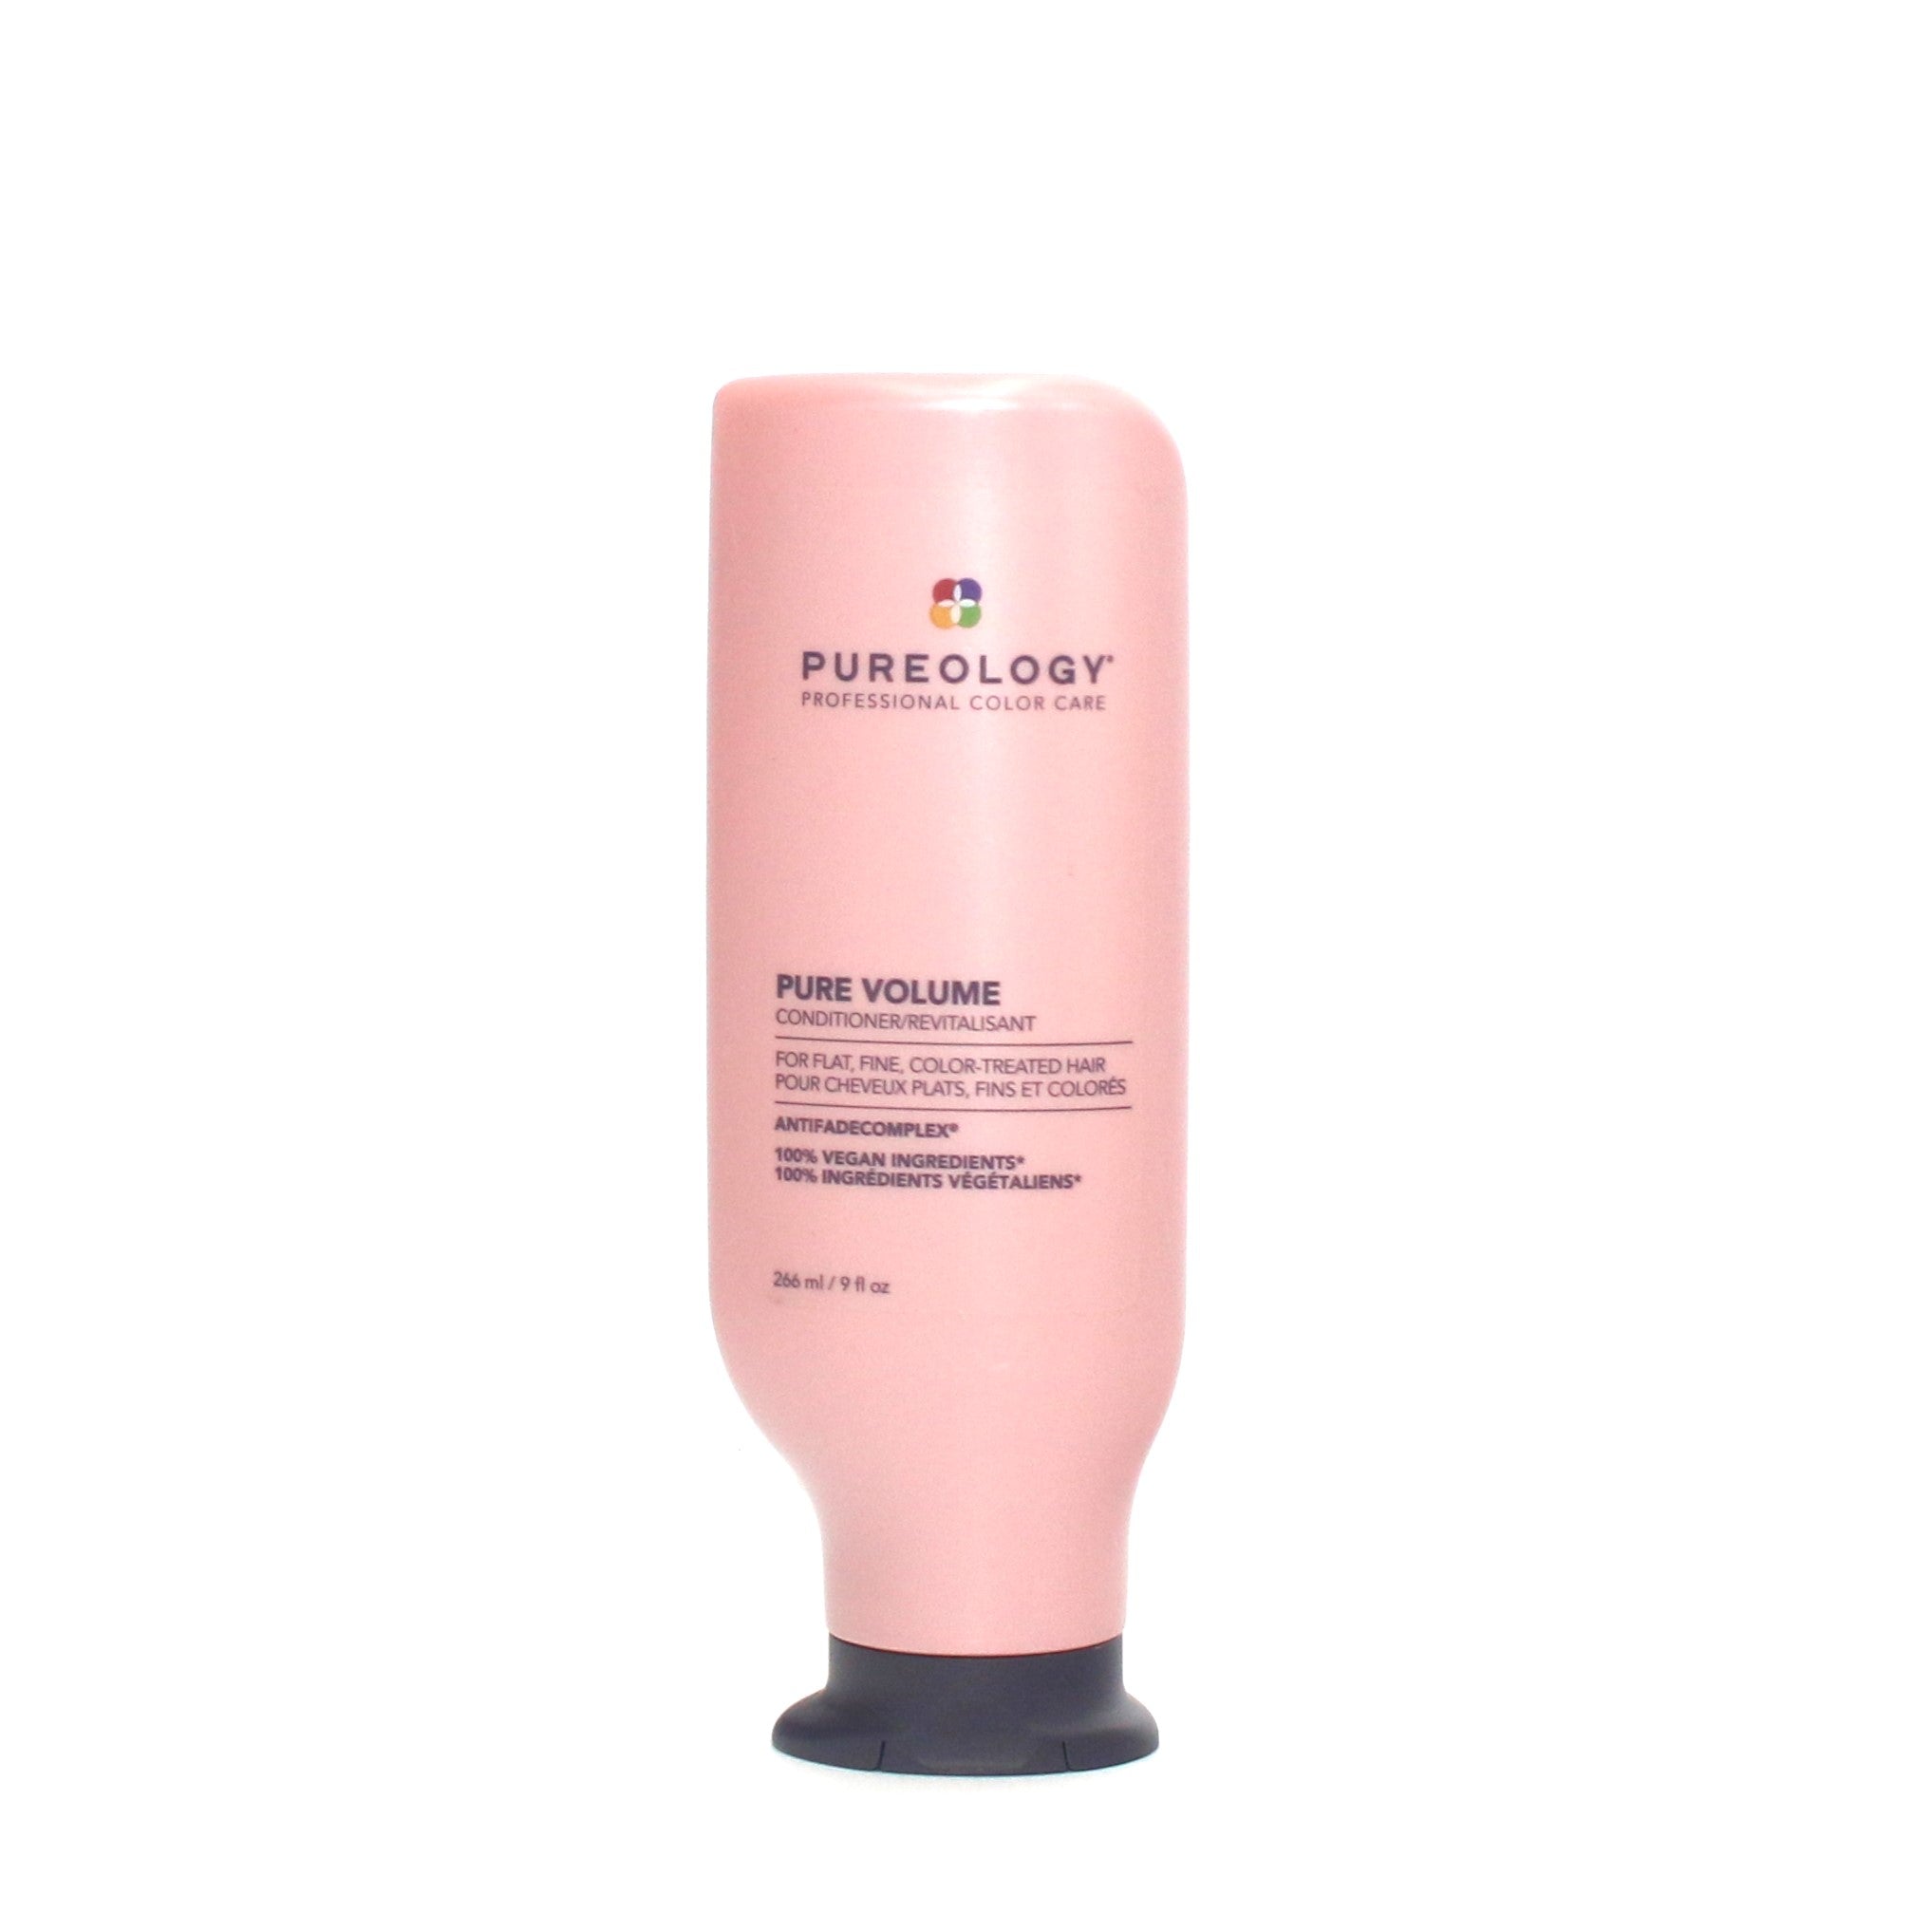 Pureology Smooth Perfection Cleansing Conditioner